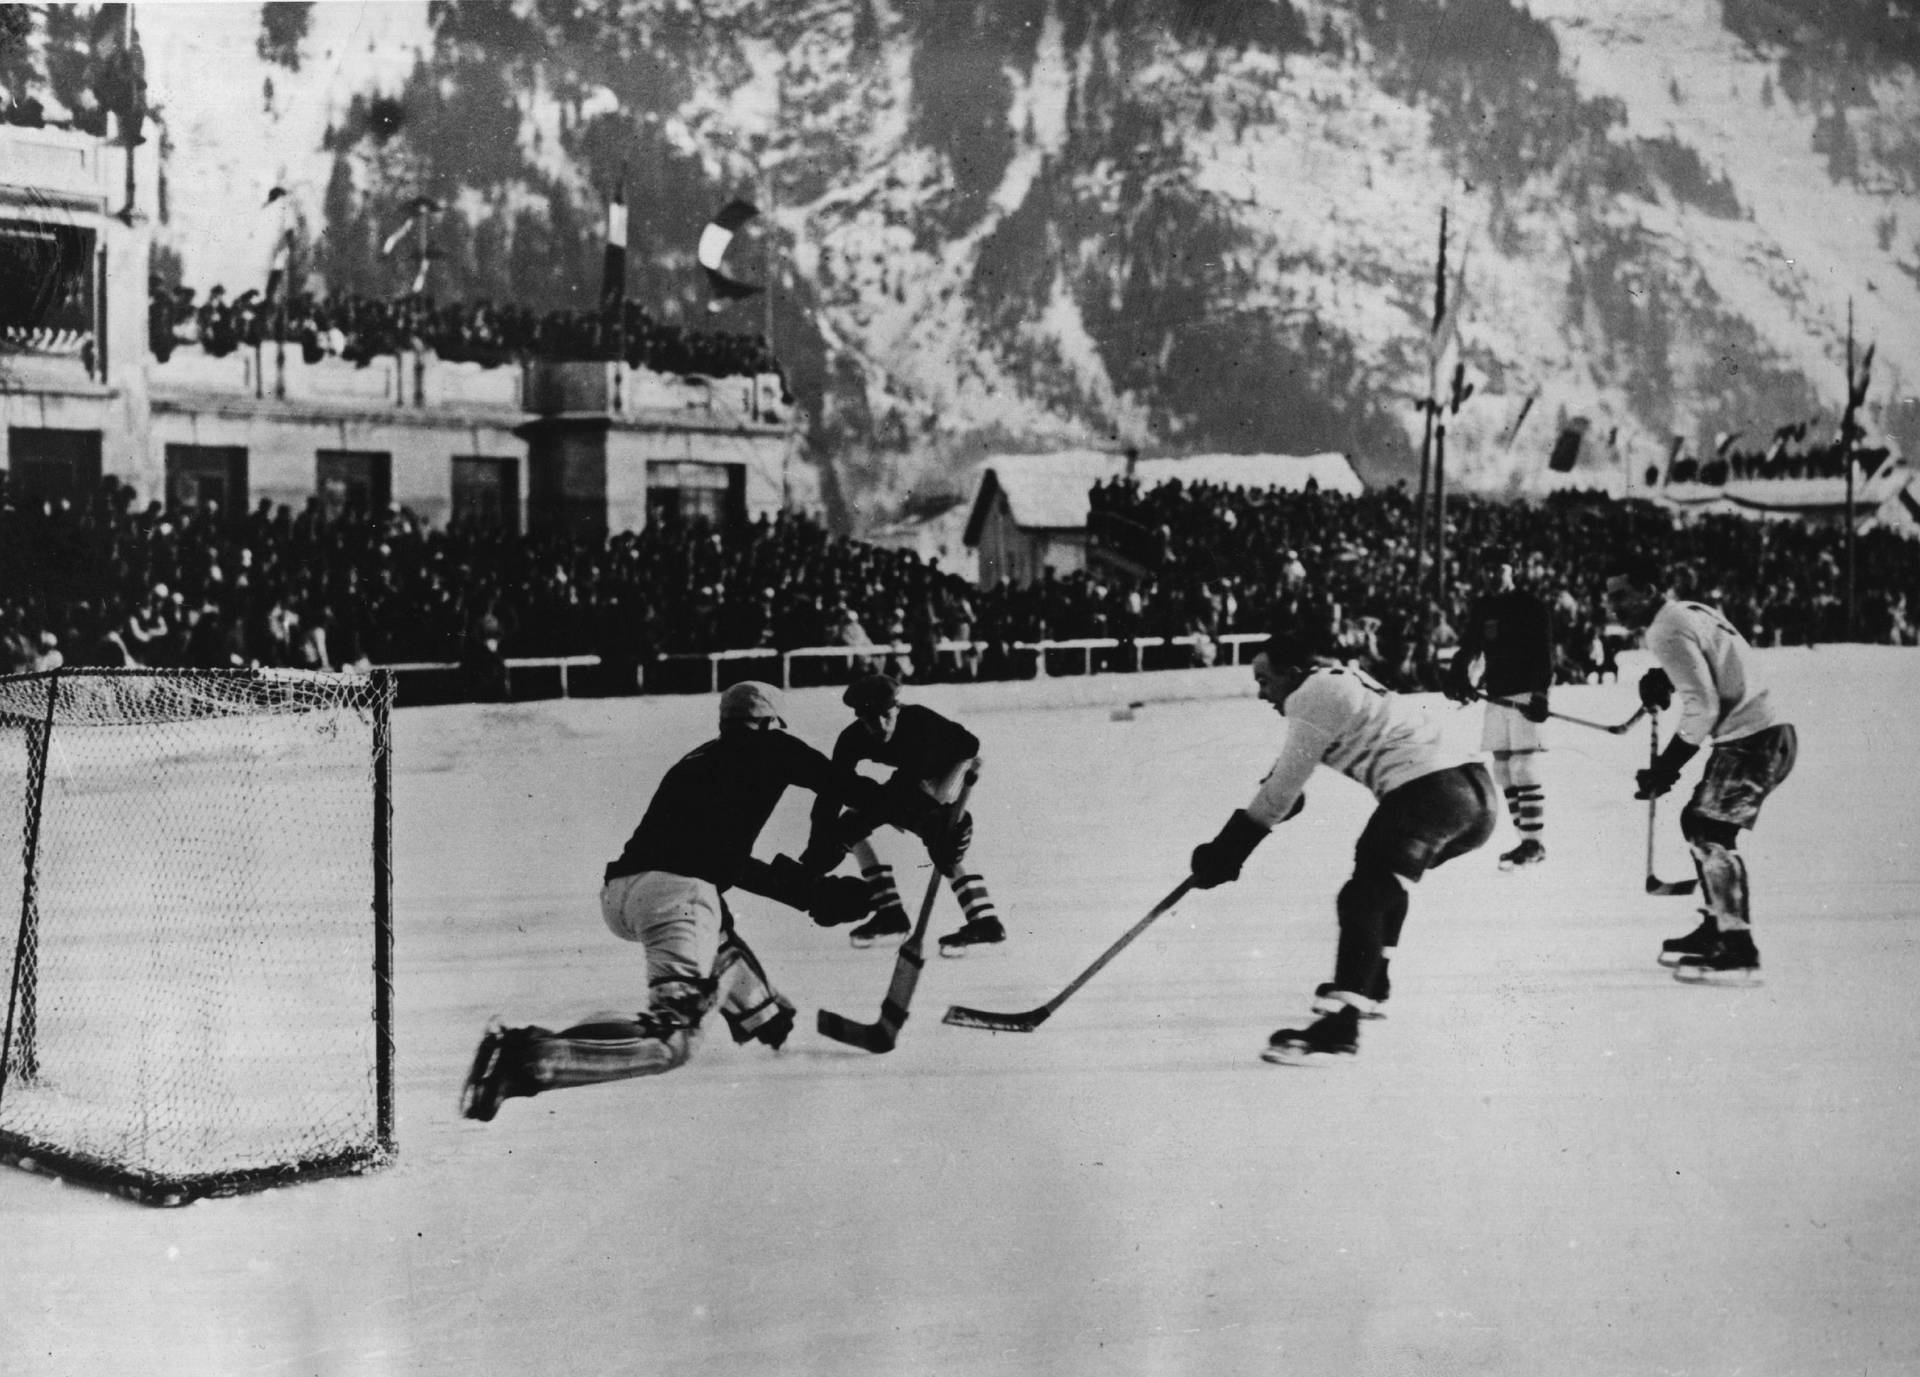 Vintage Image Of Winter Olympics Background